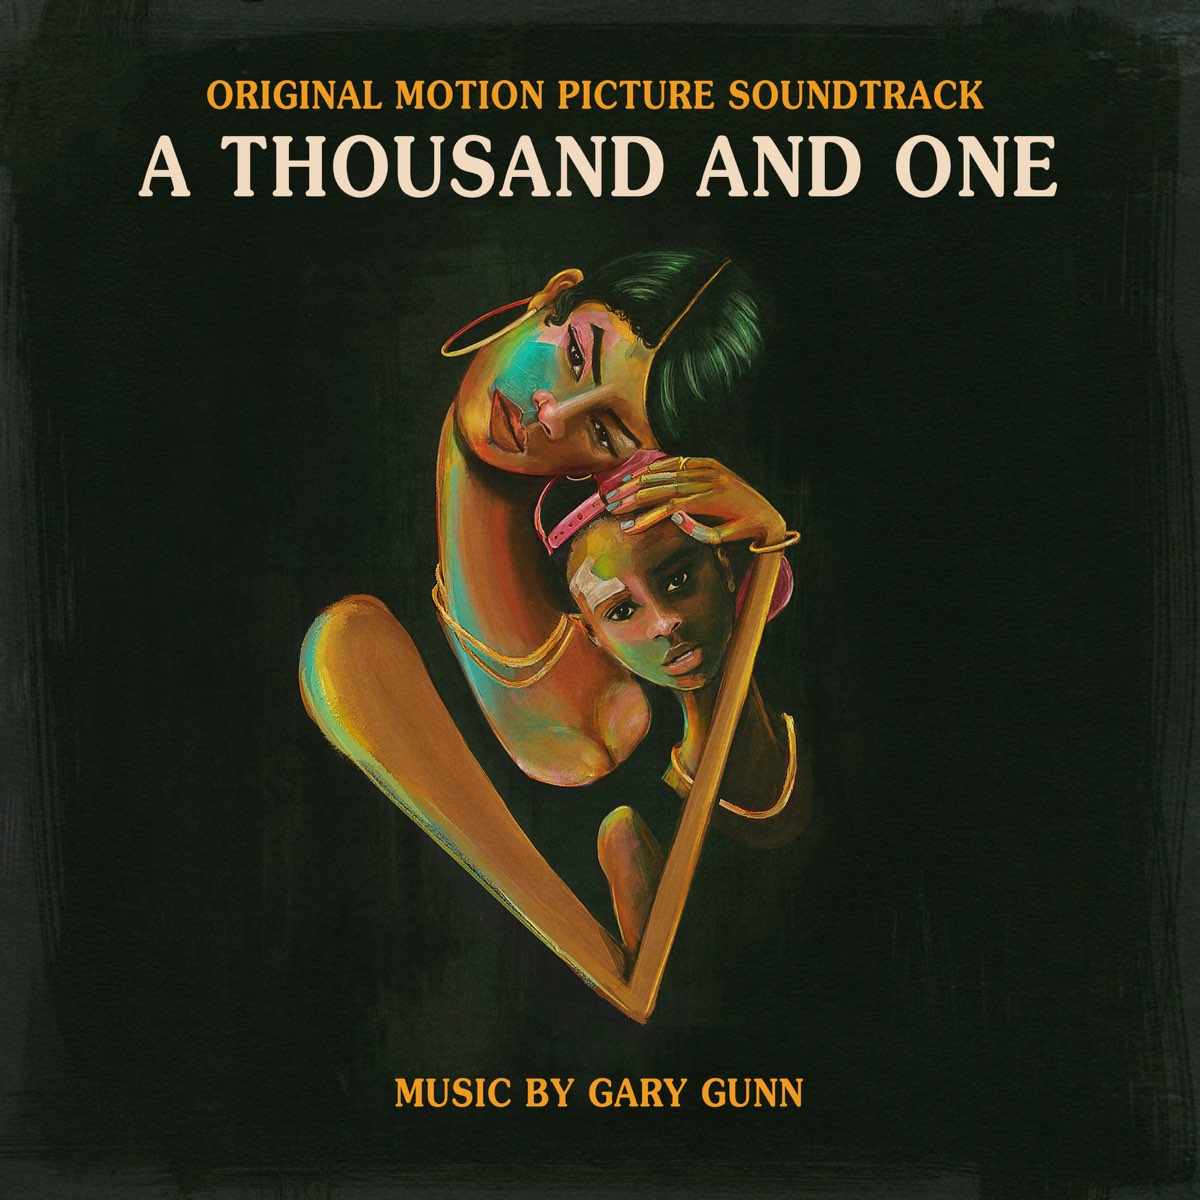 A Thousand and One (Original Motion Picture Soundtrack) - Album by